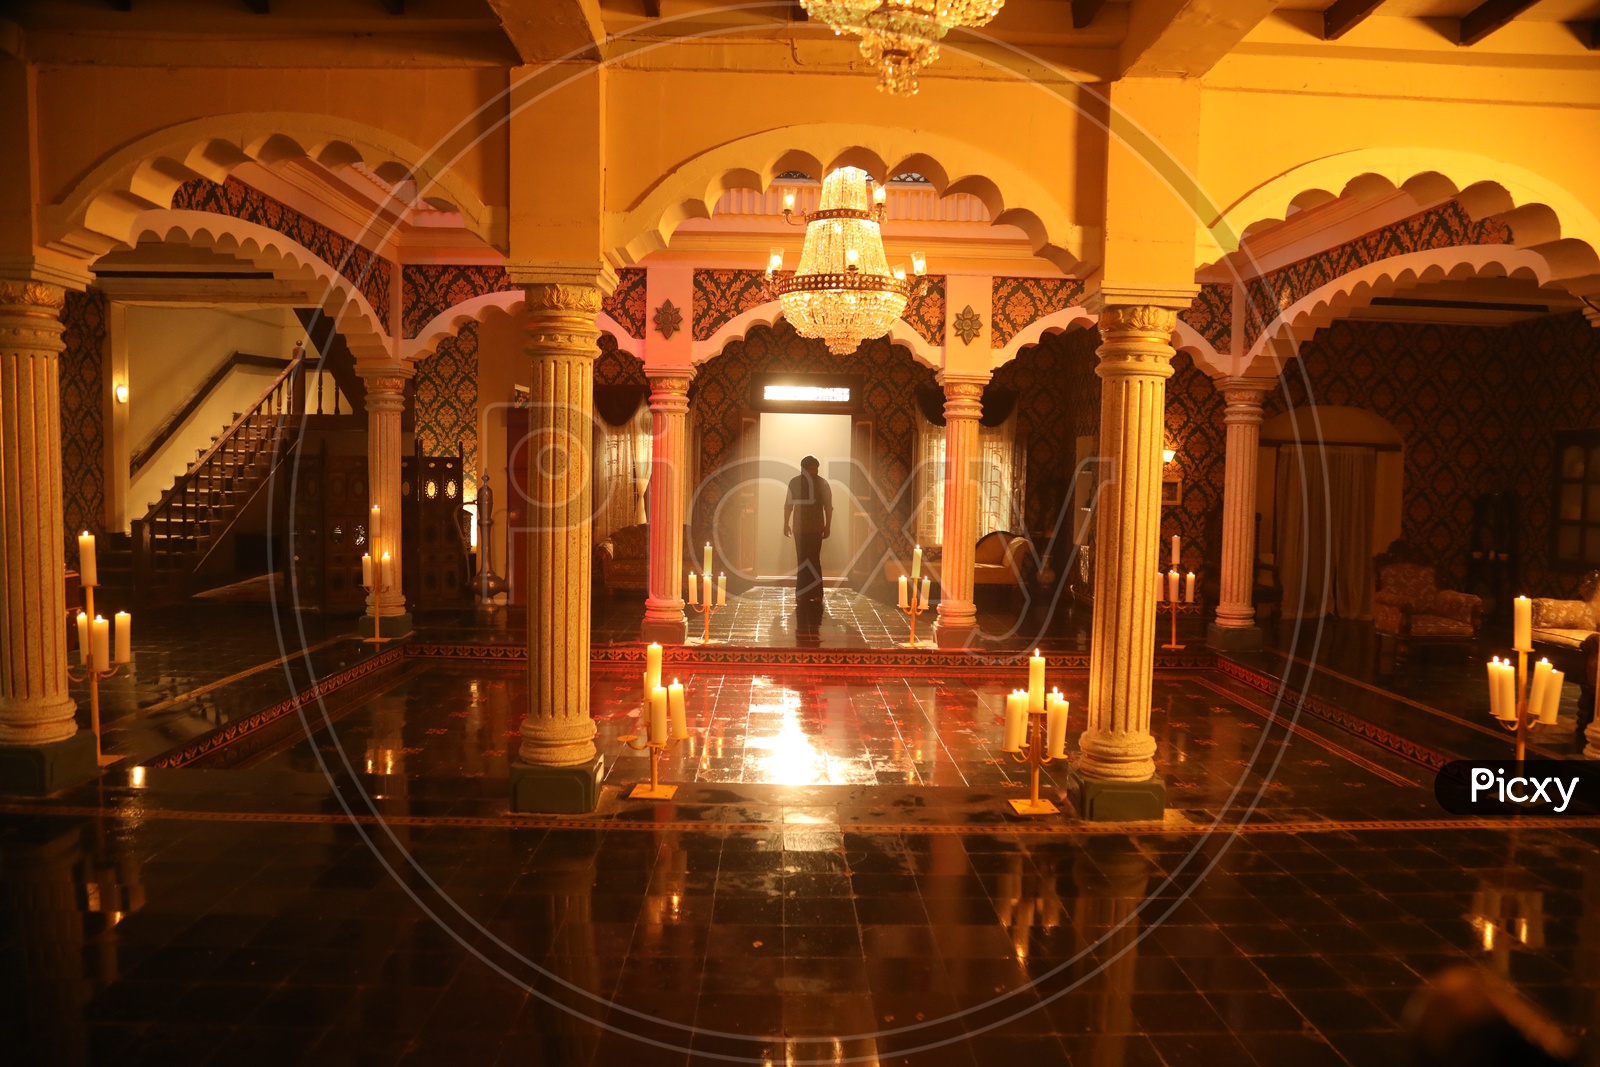 Man walking out of the Royal Indian court set up with a Throne and chandelier